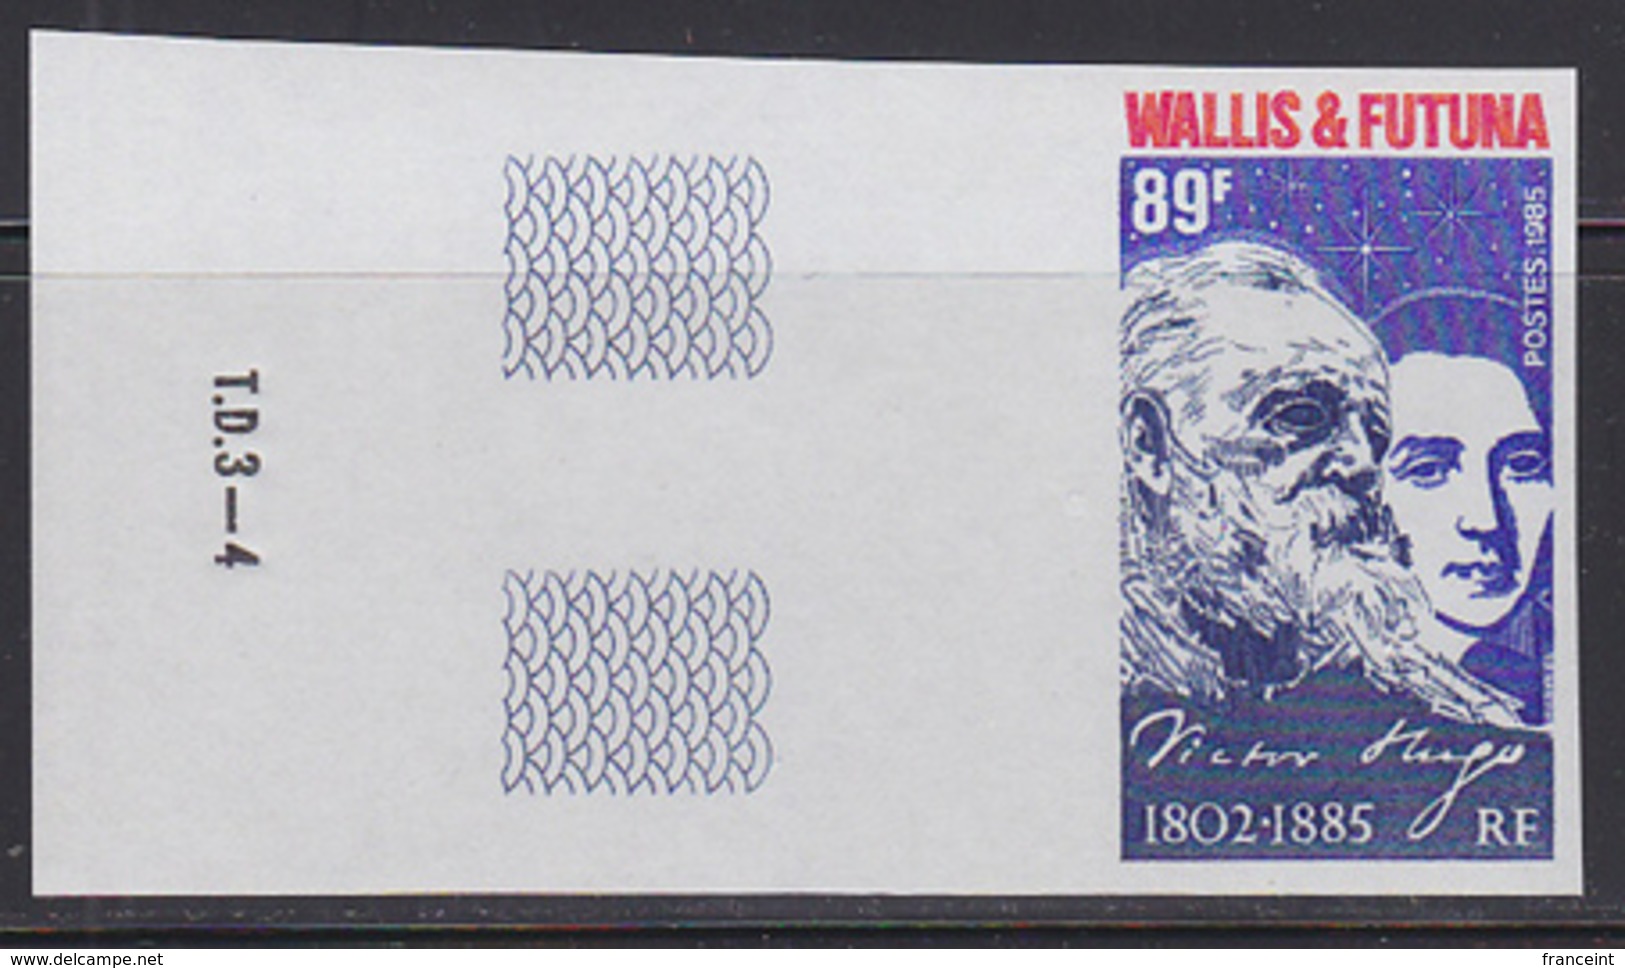 WALLIS & FUTUNA (1985) Victor Hugo Portraits In His Youth And Old Age. Imperforate. Scott No 326. Yvert No 329. - Imperforates, Proofs & Errors